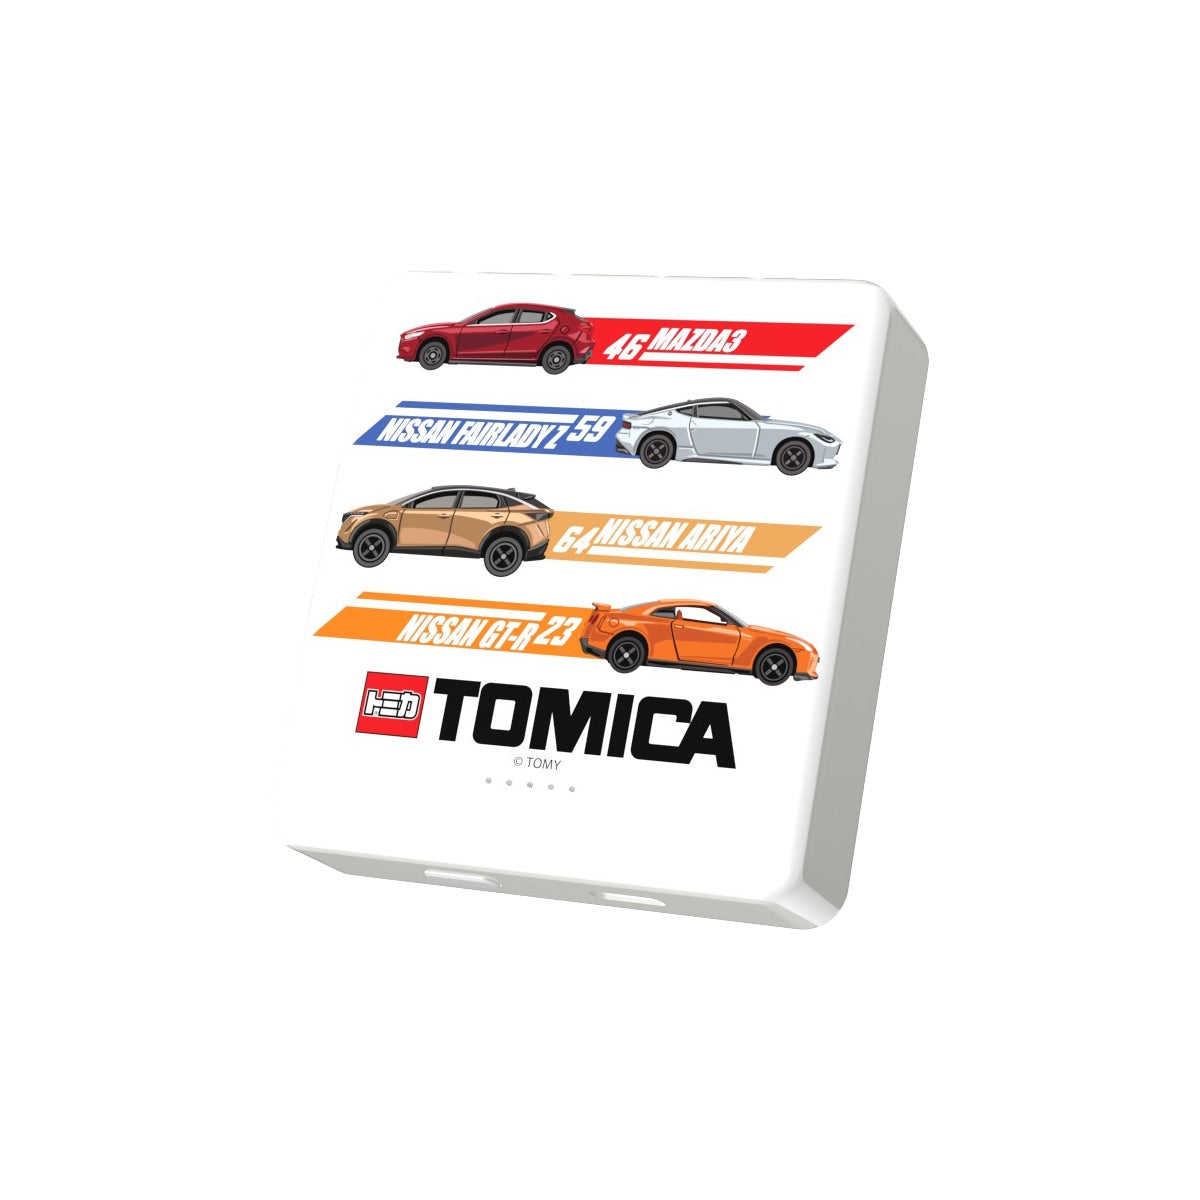 Vinnic X Tomica Magnetic Powerbank【LIMITED EDITION】- 02